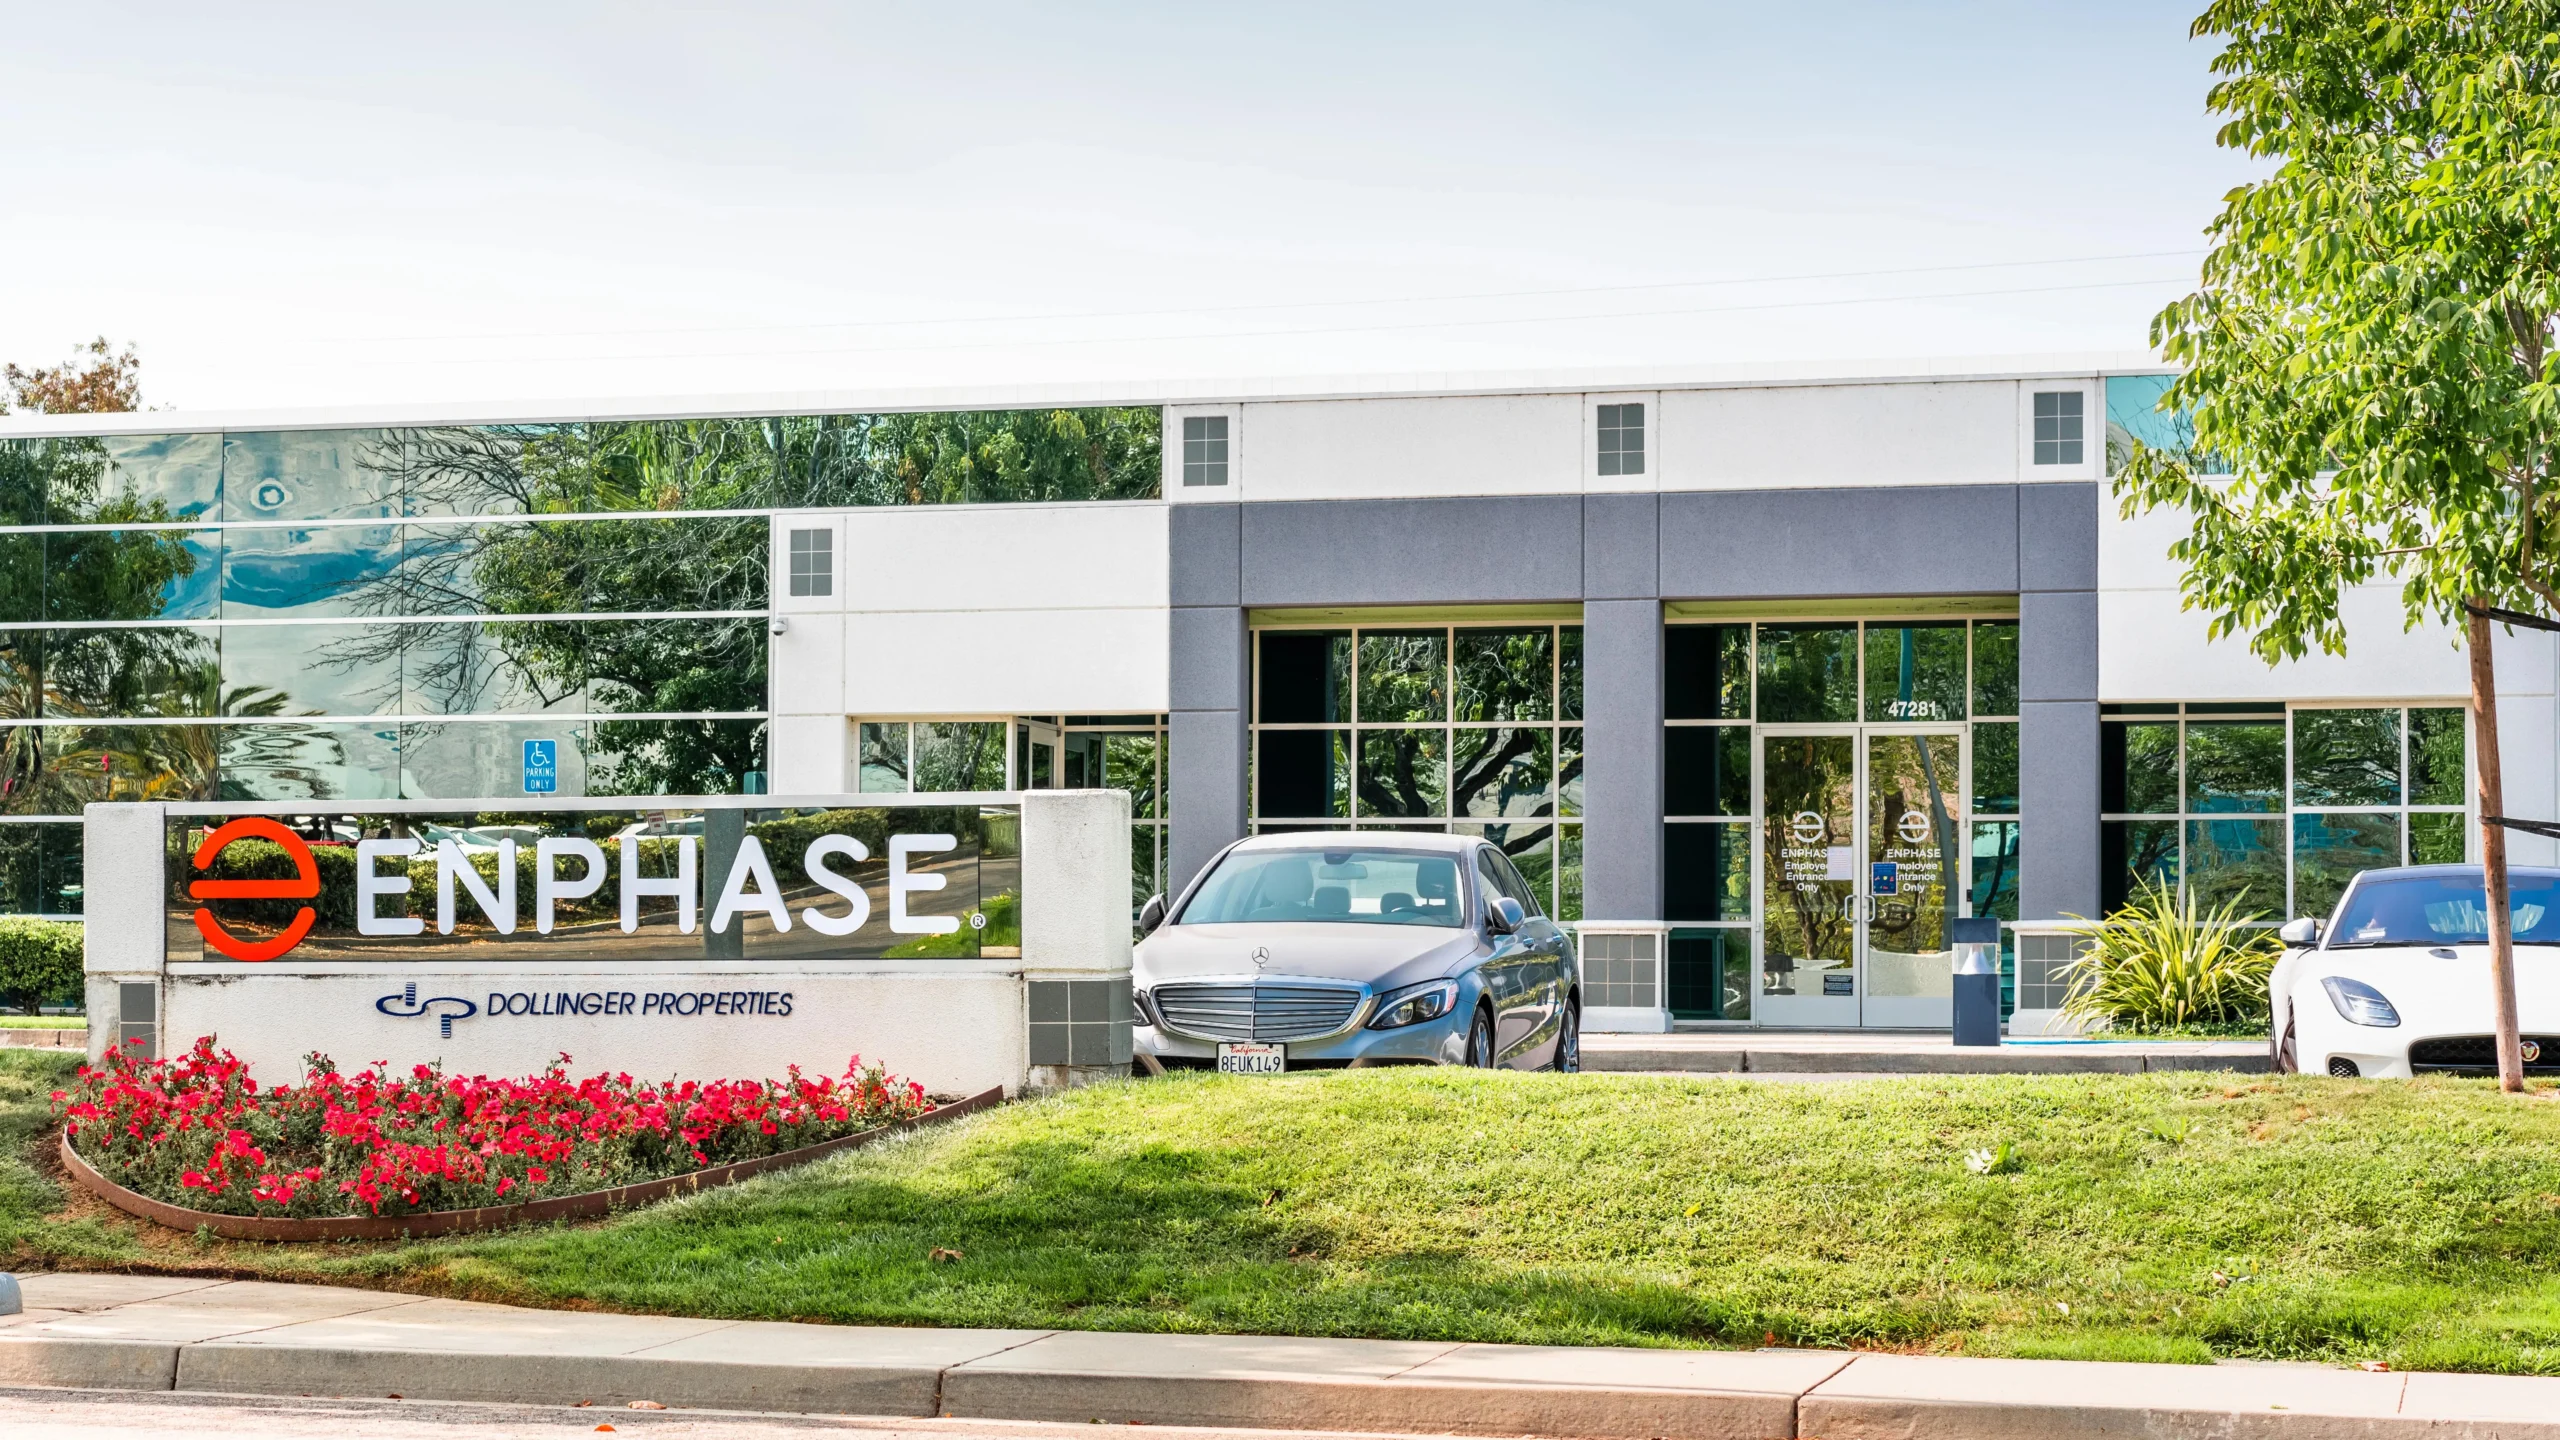 enphase solar energy private limited - Is Enphase owned by SunPower